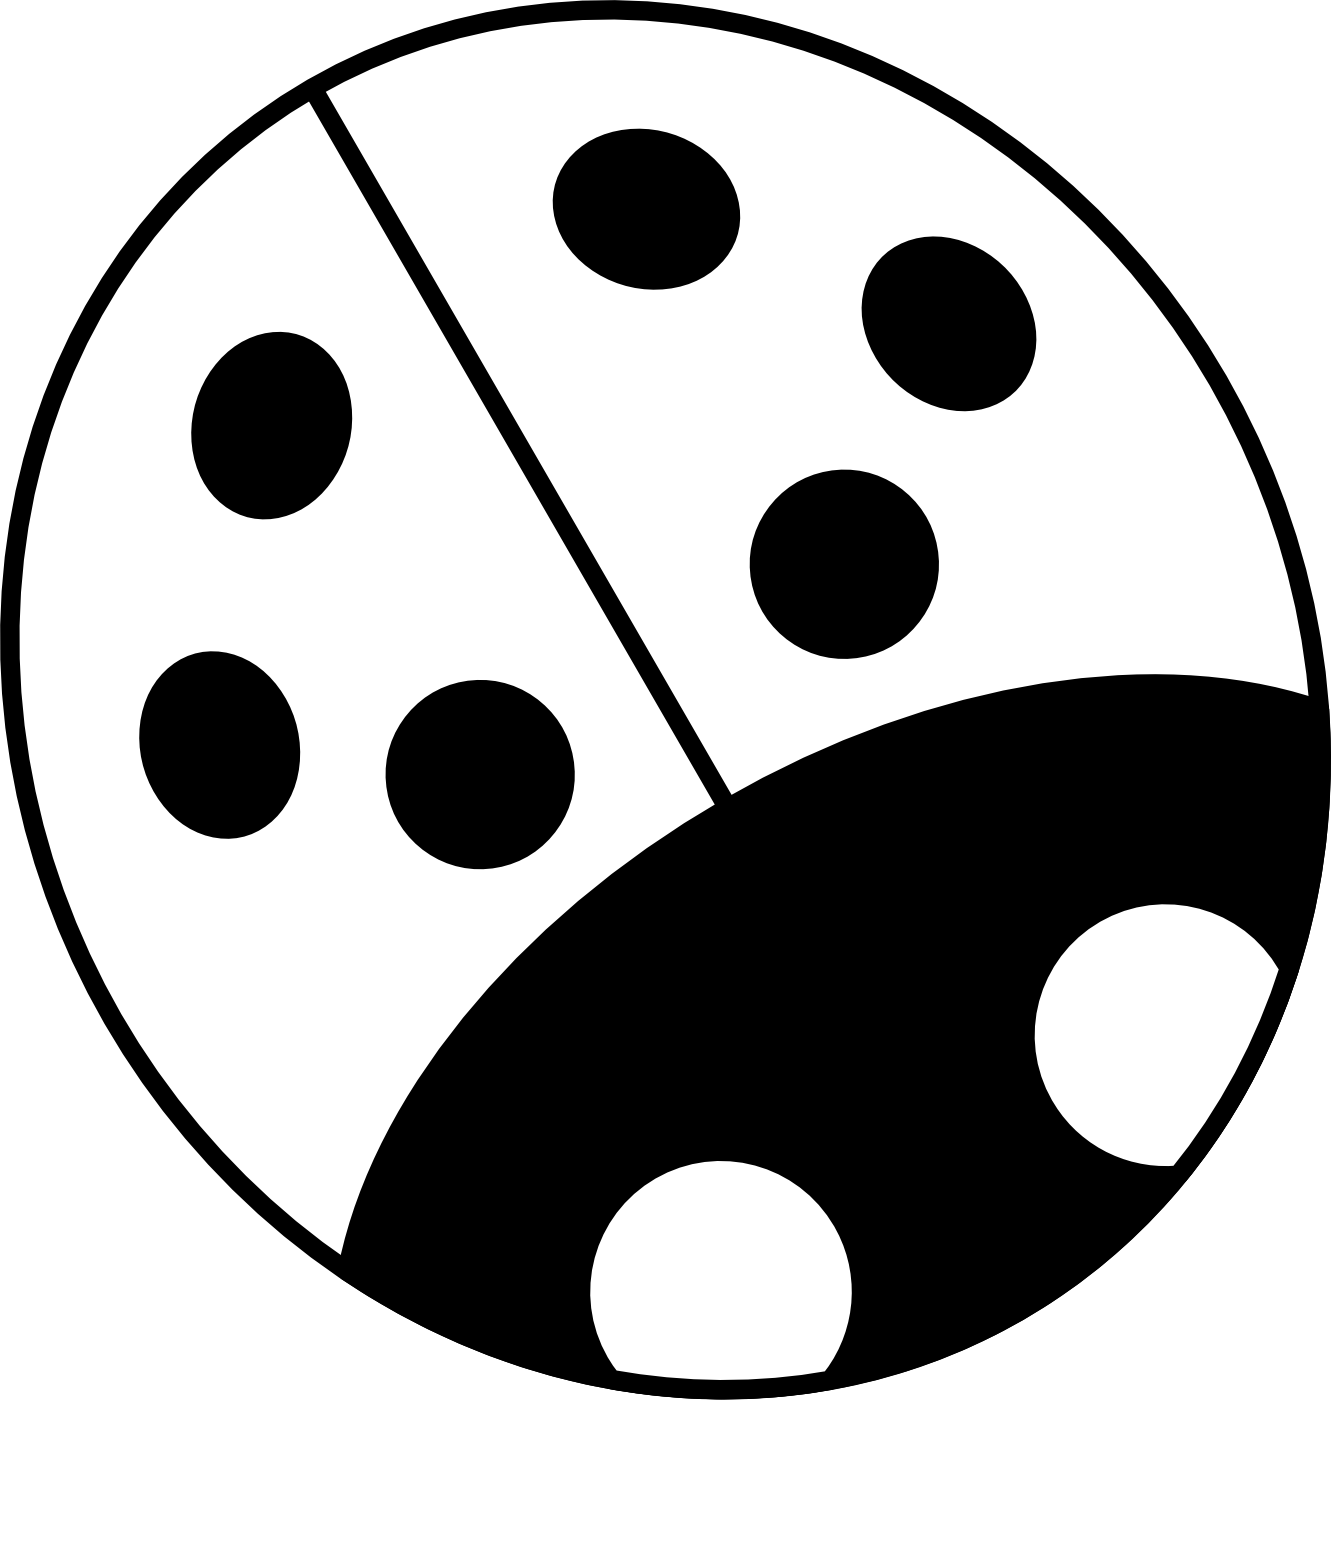 Ladybug Clipart Black And White   Clipart Panda   Free Clipart Images